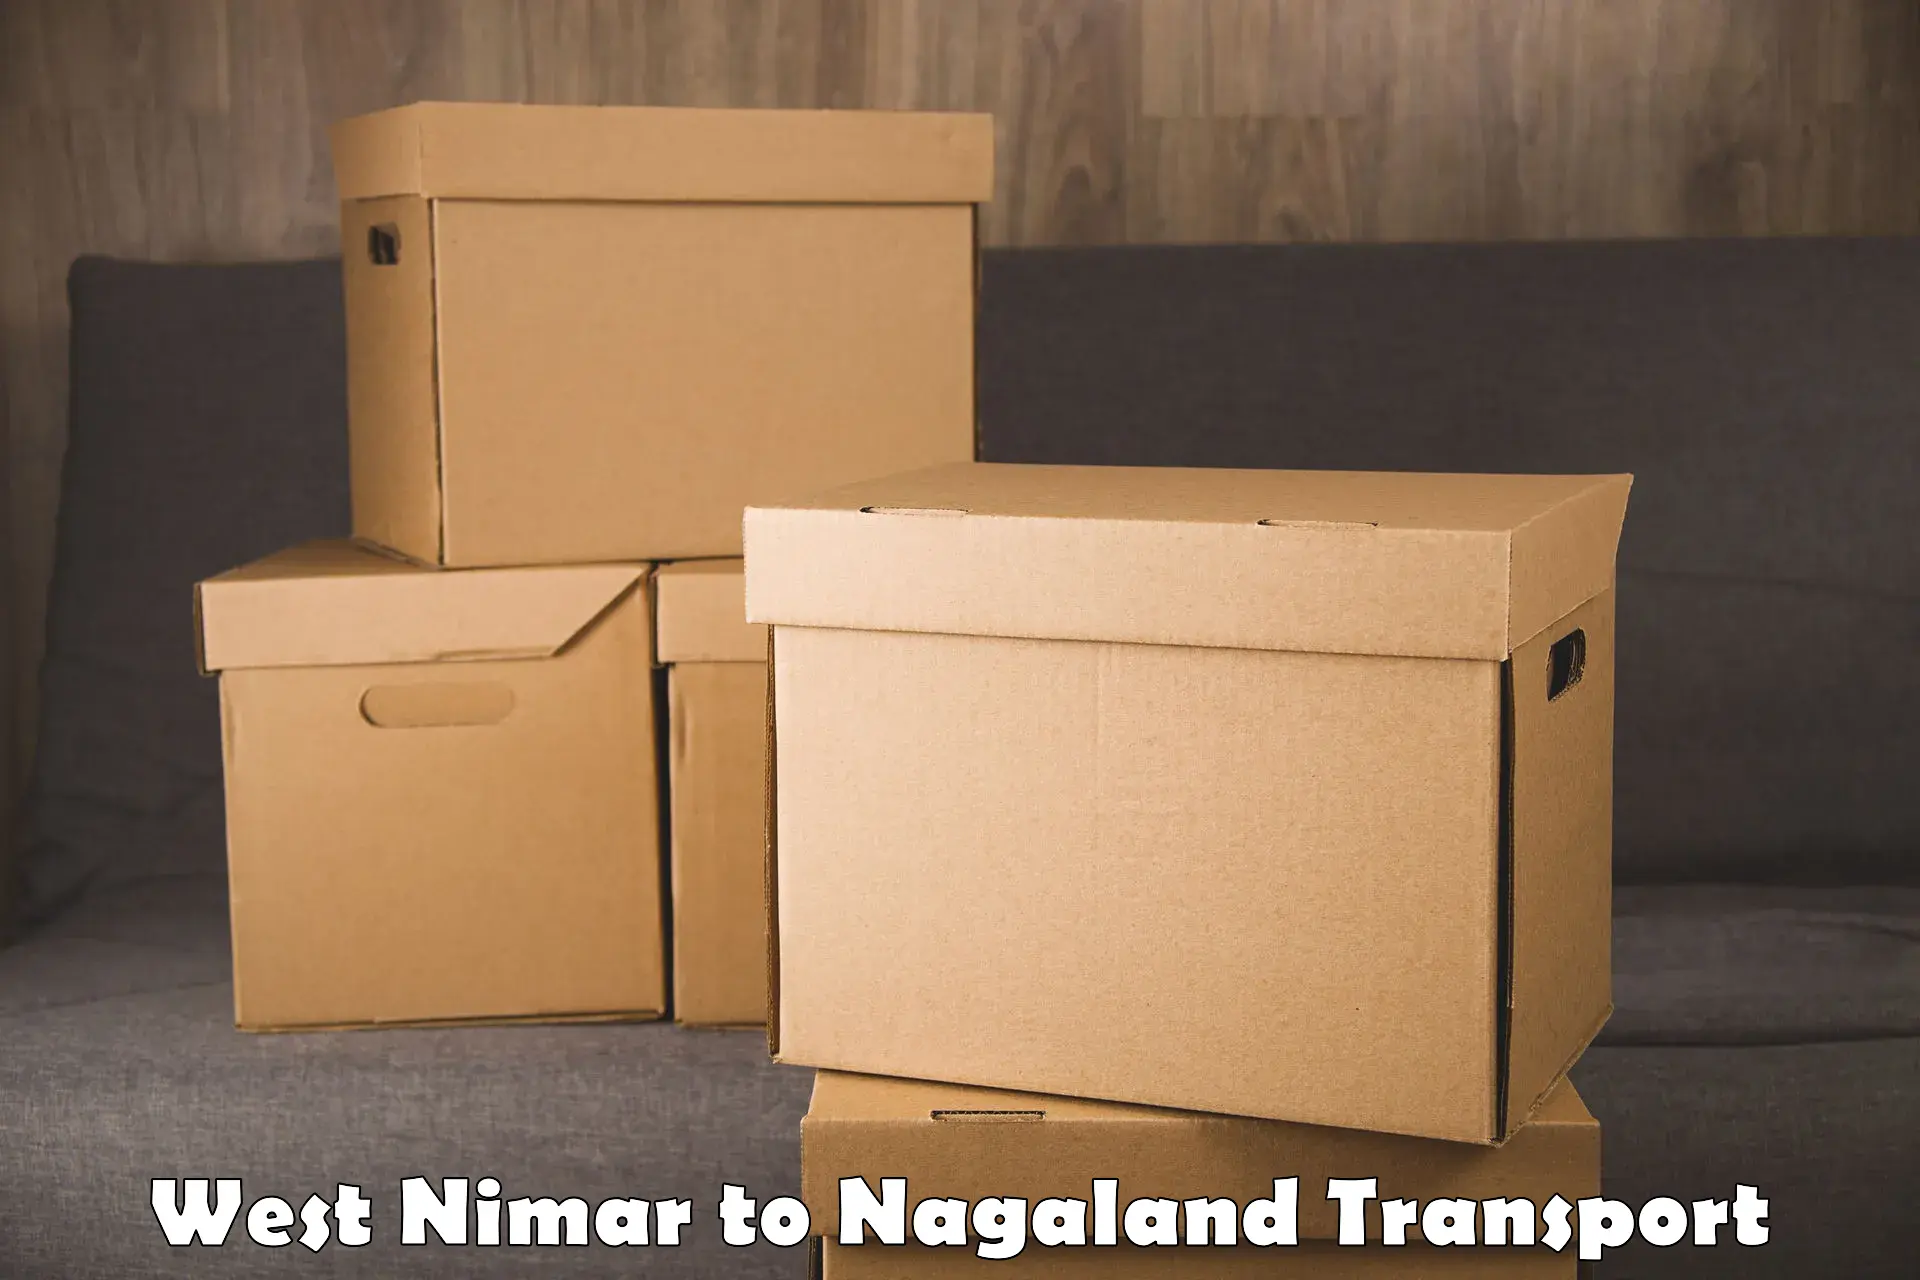 Cycle transportation service West Nimar to Nagaland